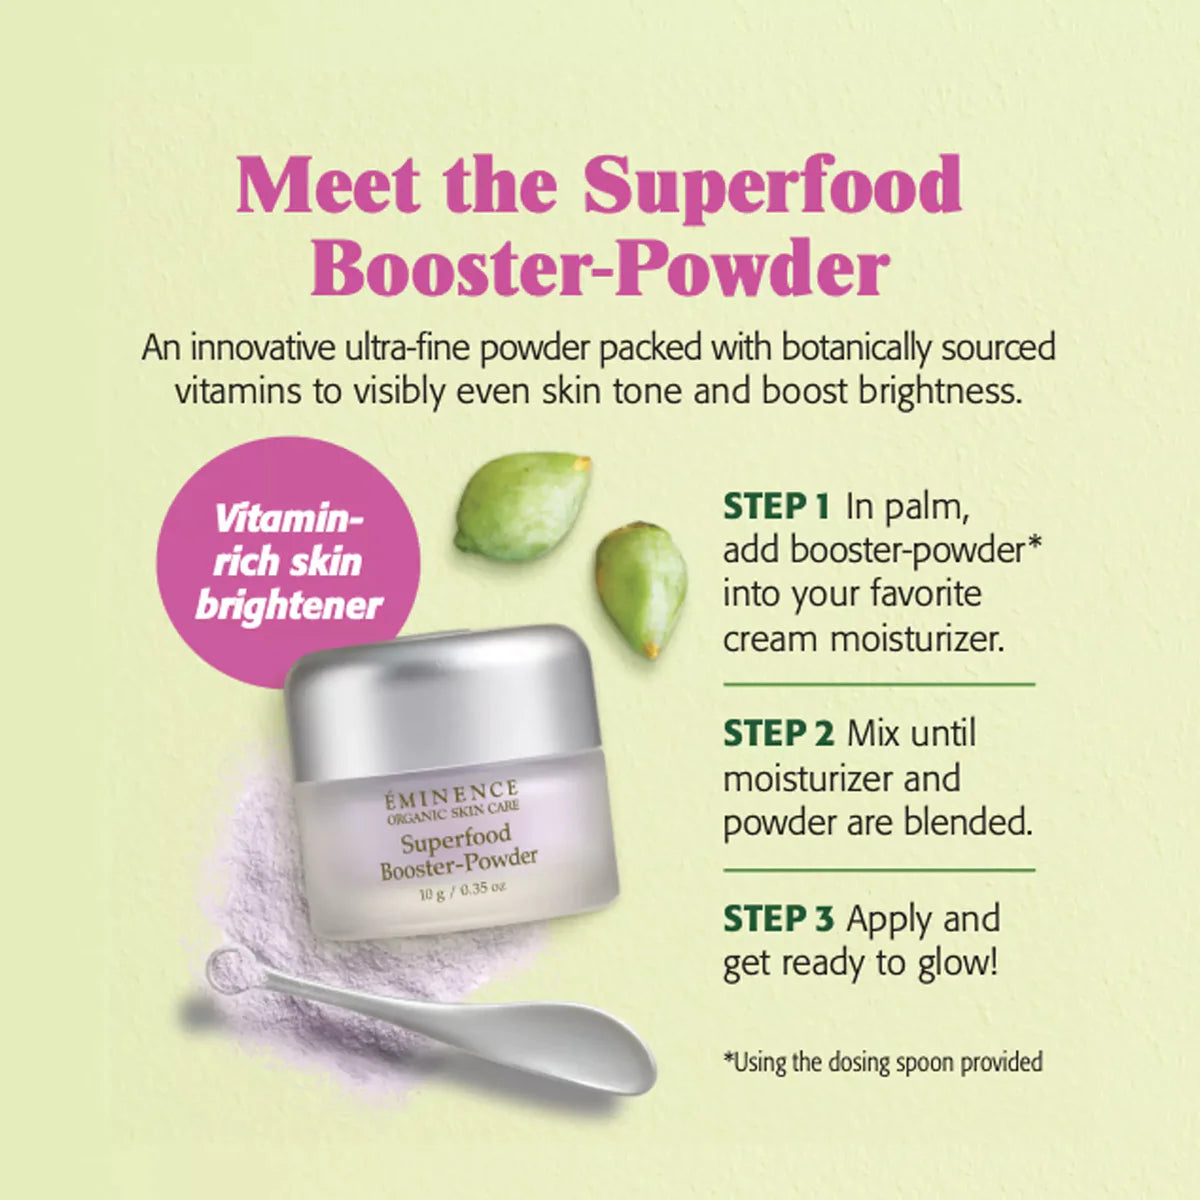 Eminence Superfood Booster-Powder directions